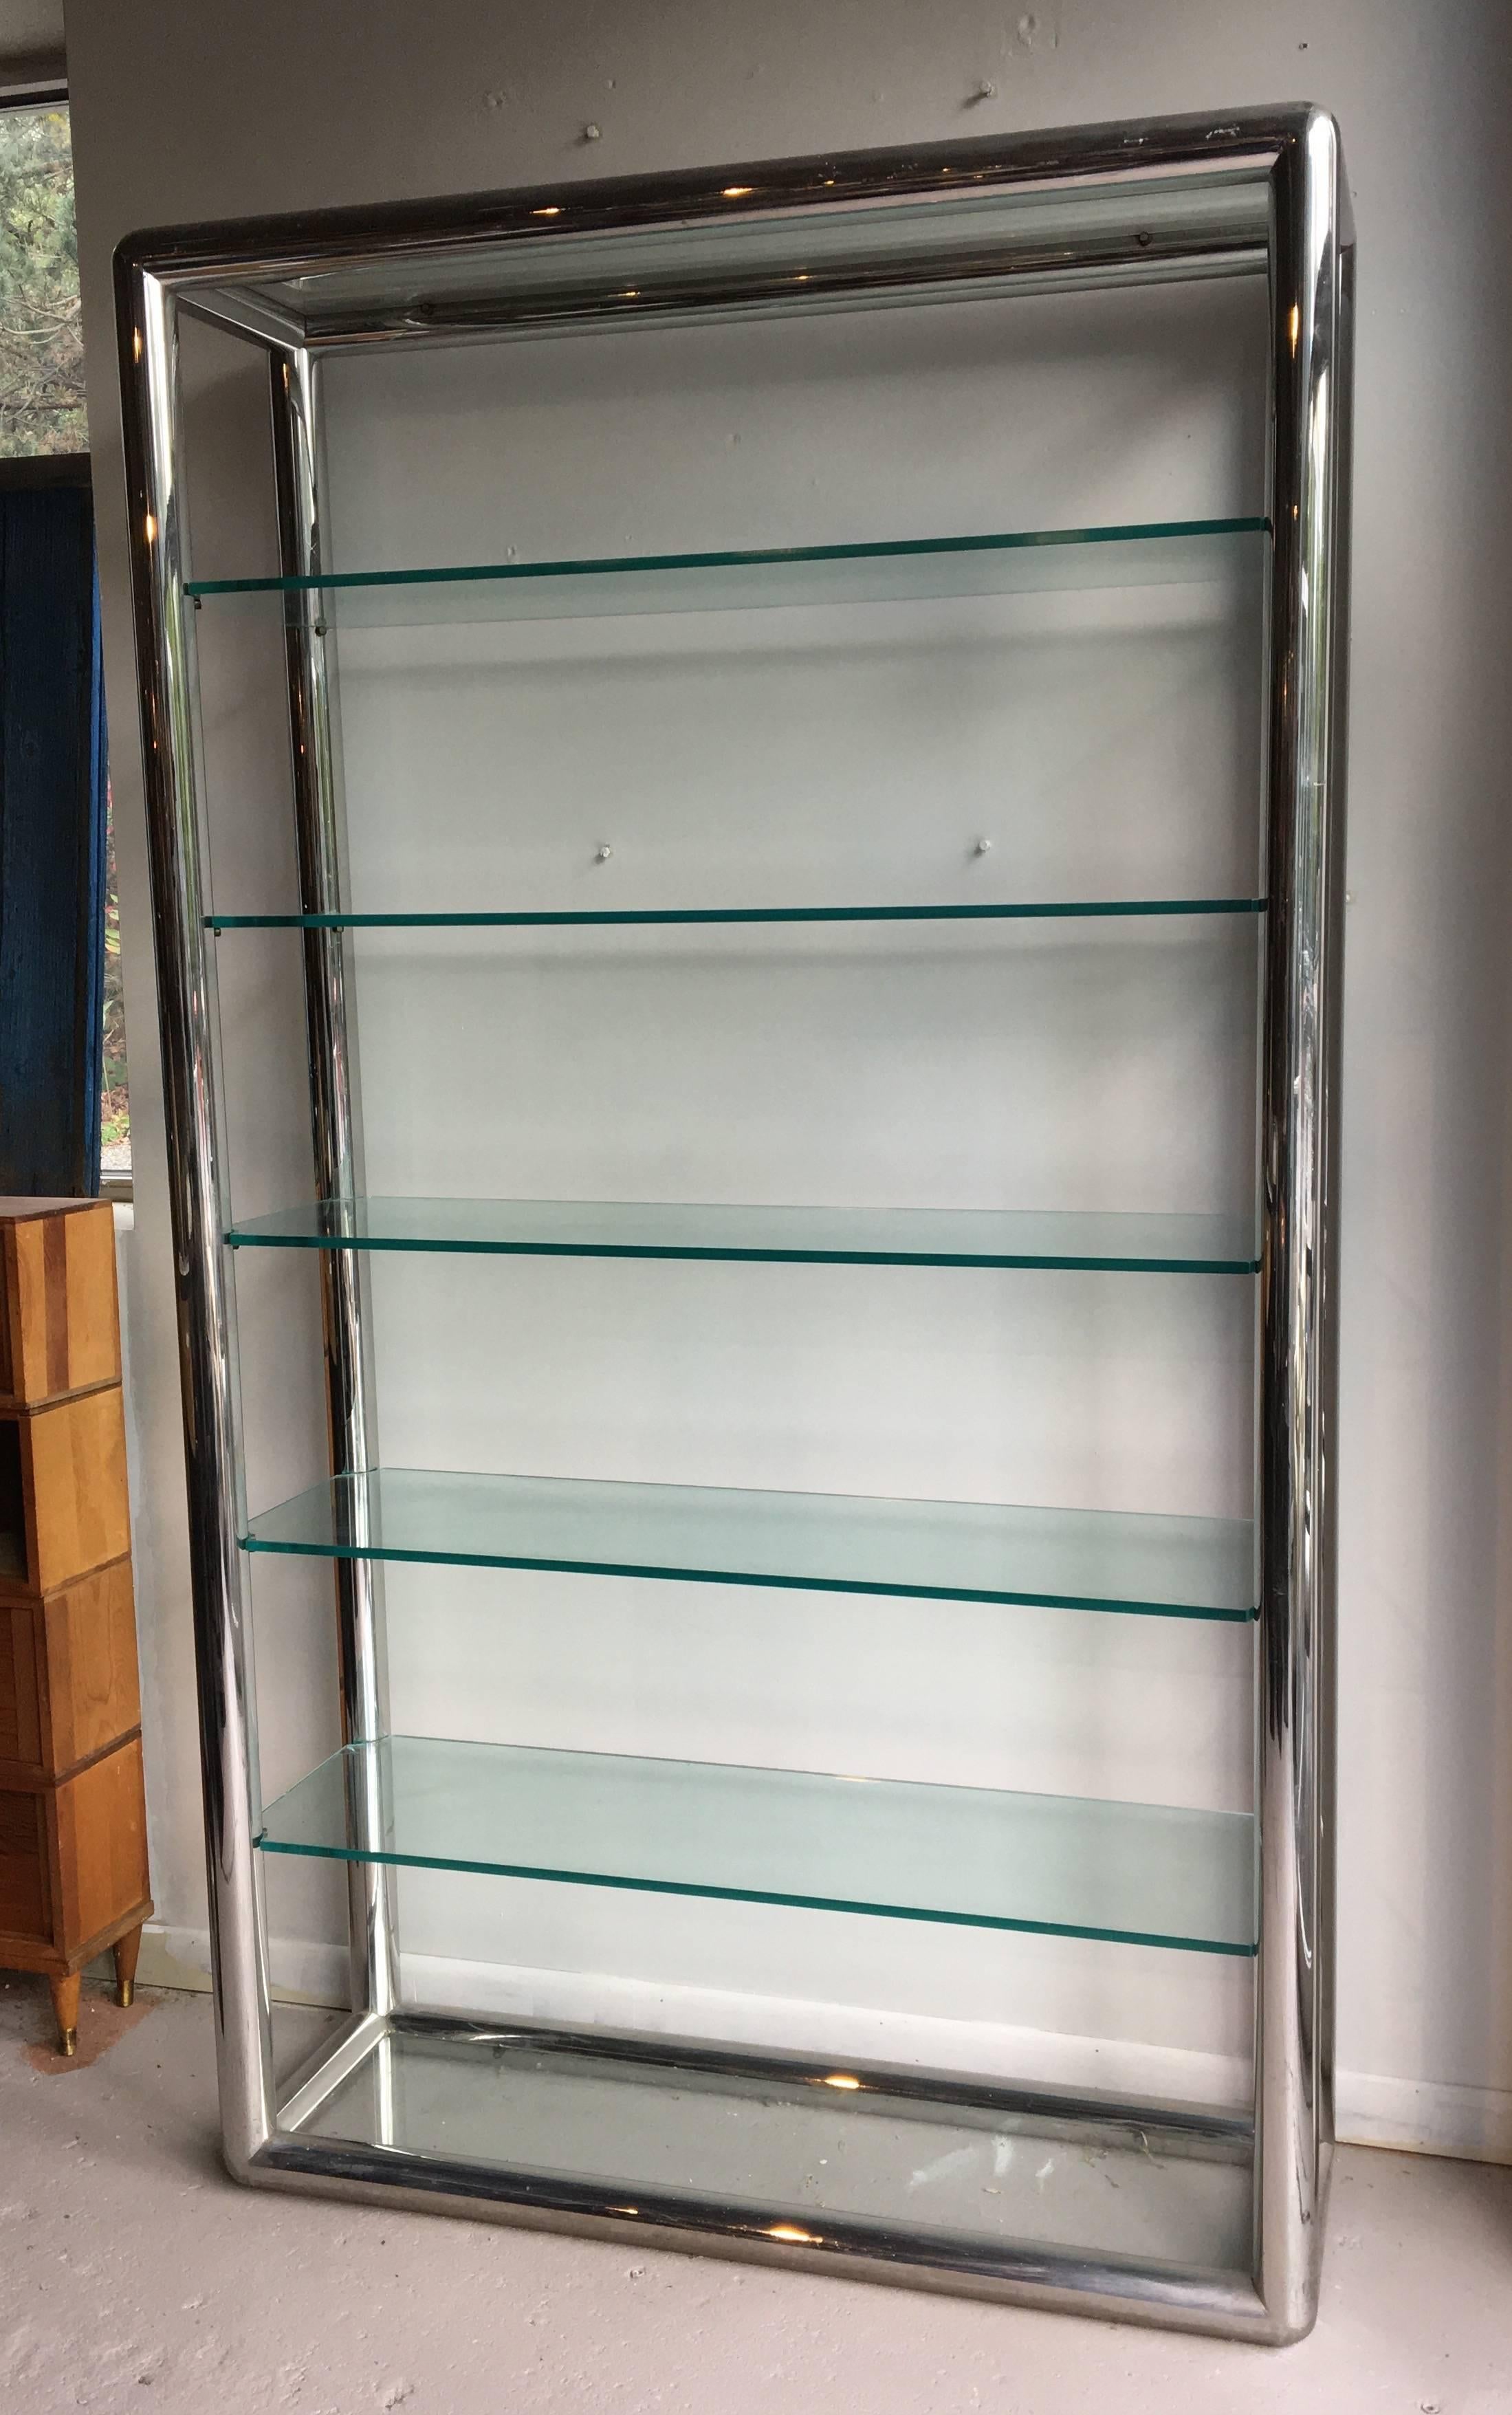 Substantial shelving unit made in 2.5